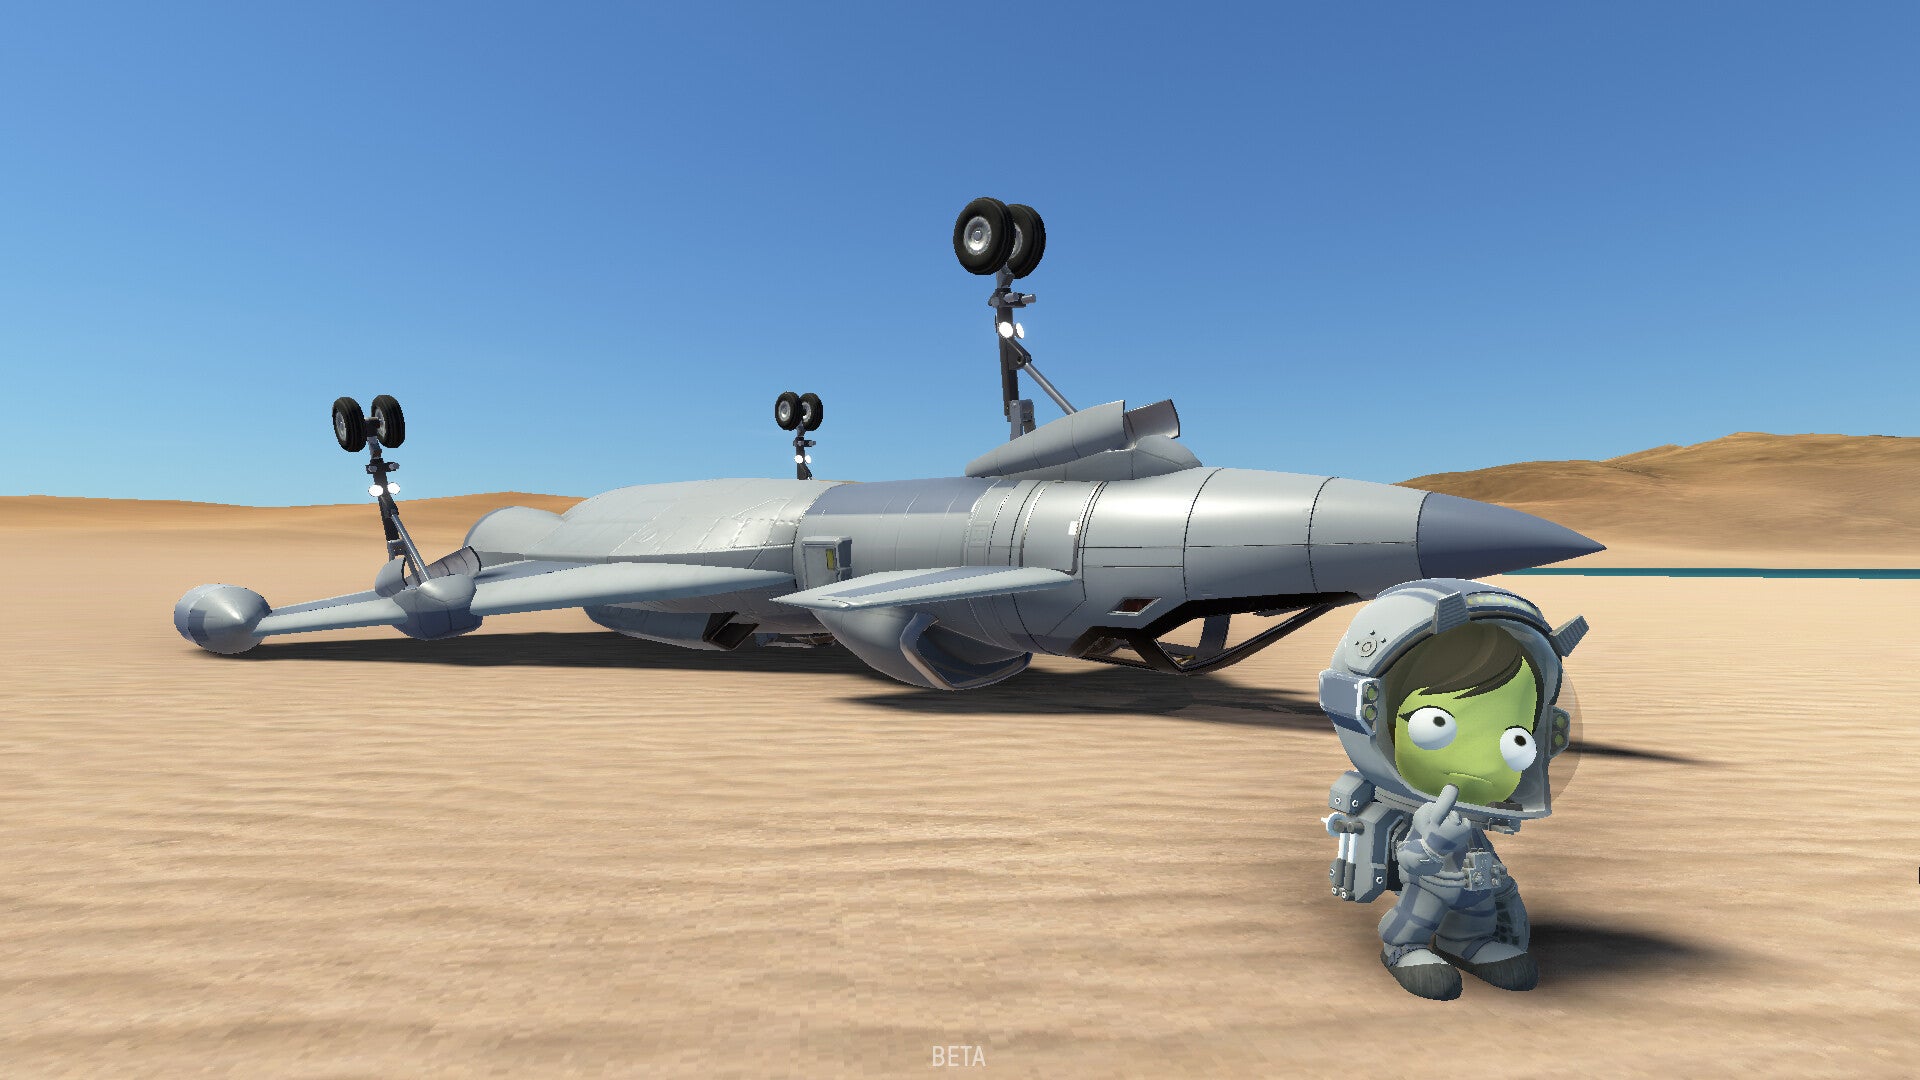 A single kerbal stands on a desert planet next to a crashed ship in Kerbal Space Program 2